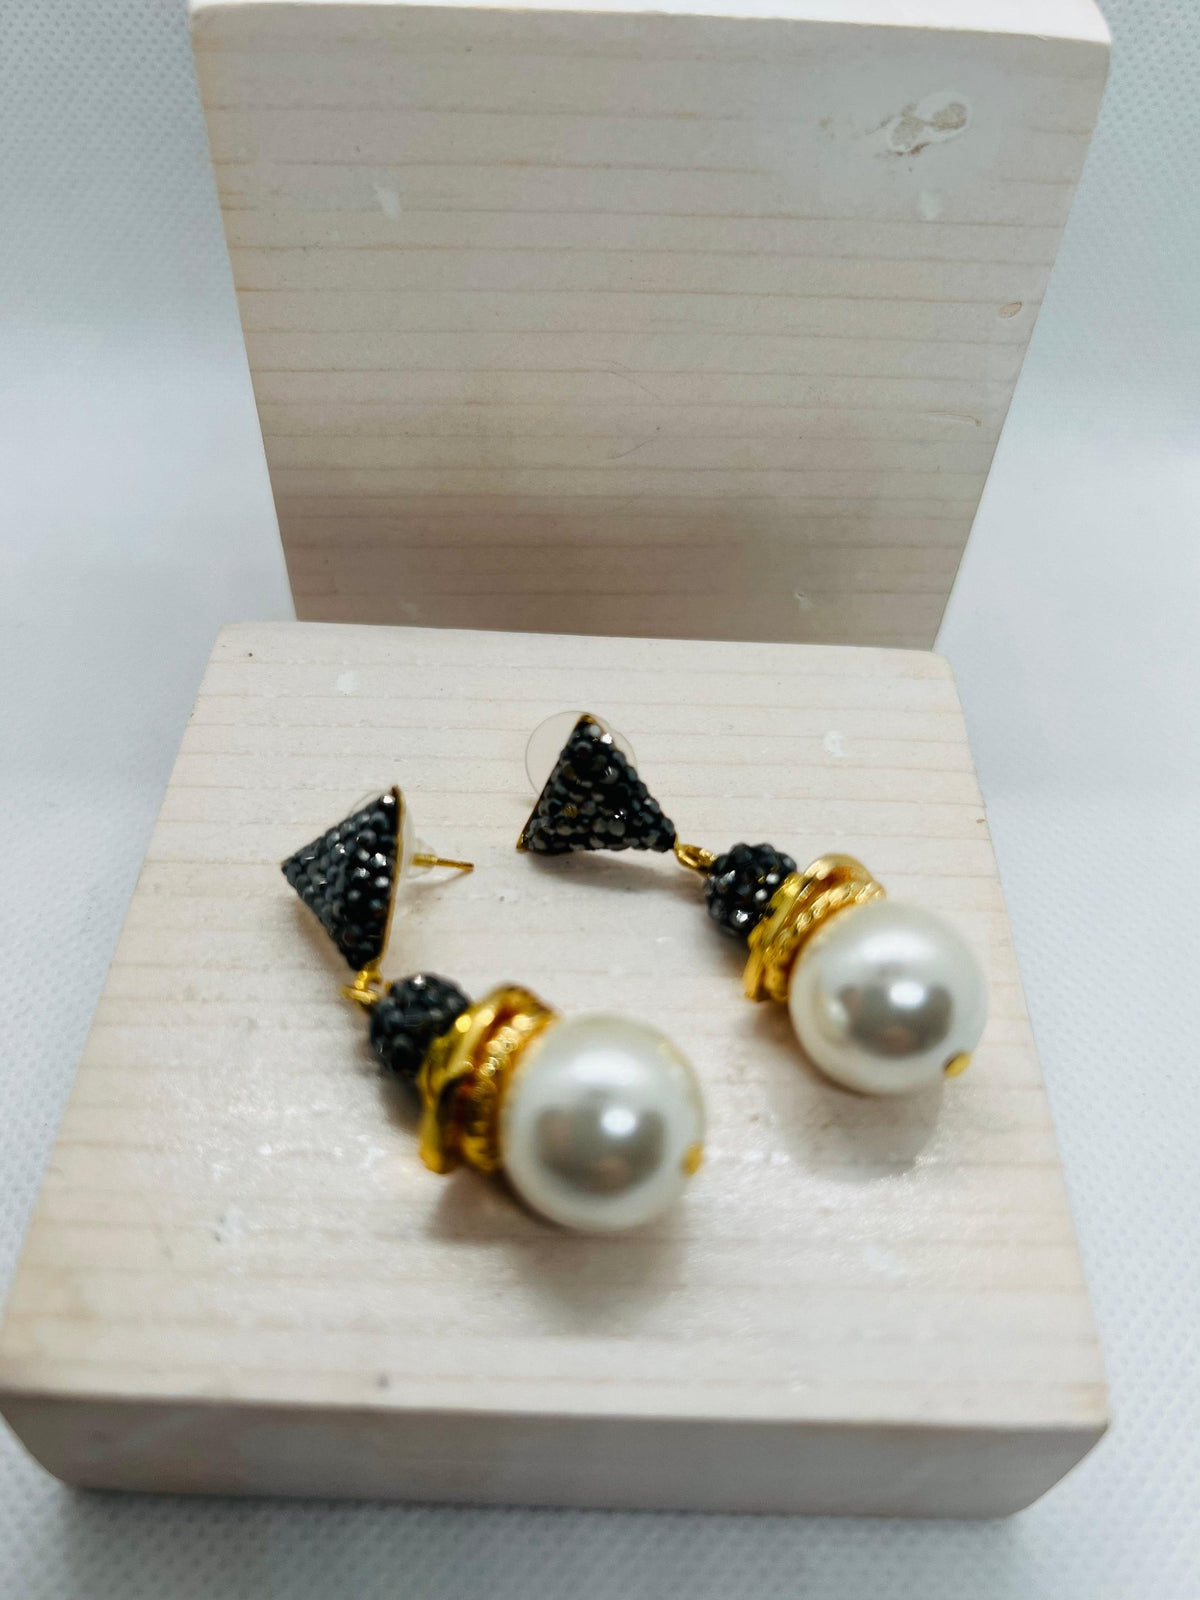 Agatha Cultured Pearls Earrings - Penelope Made This 